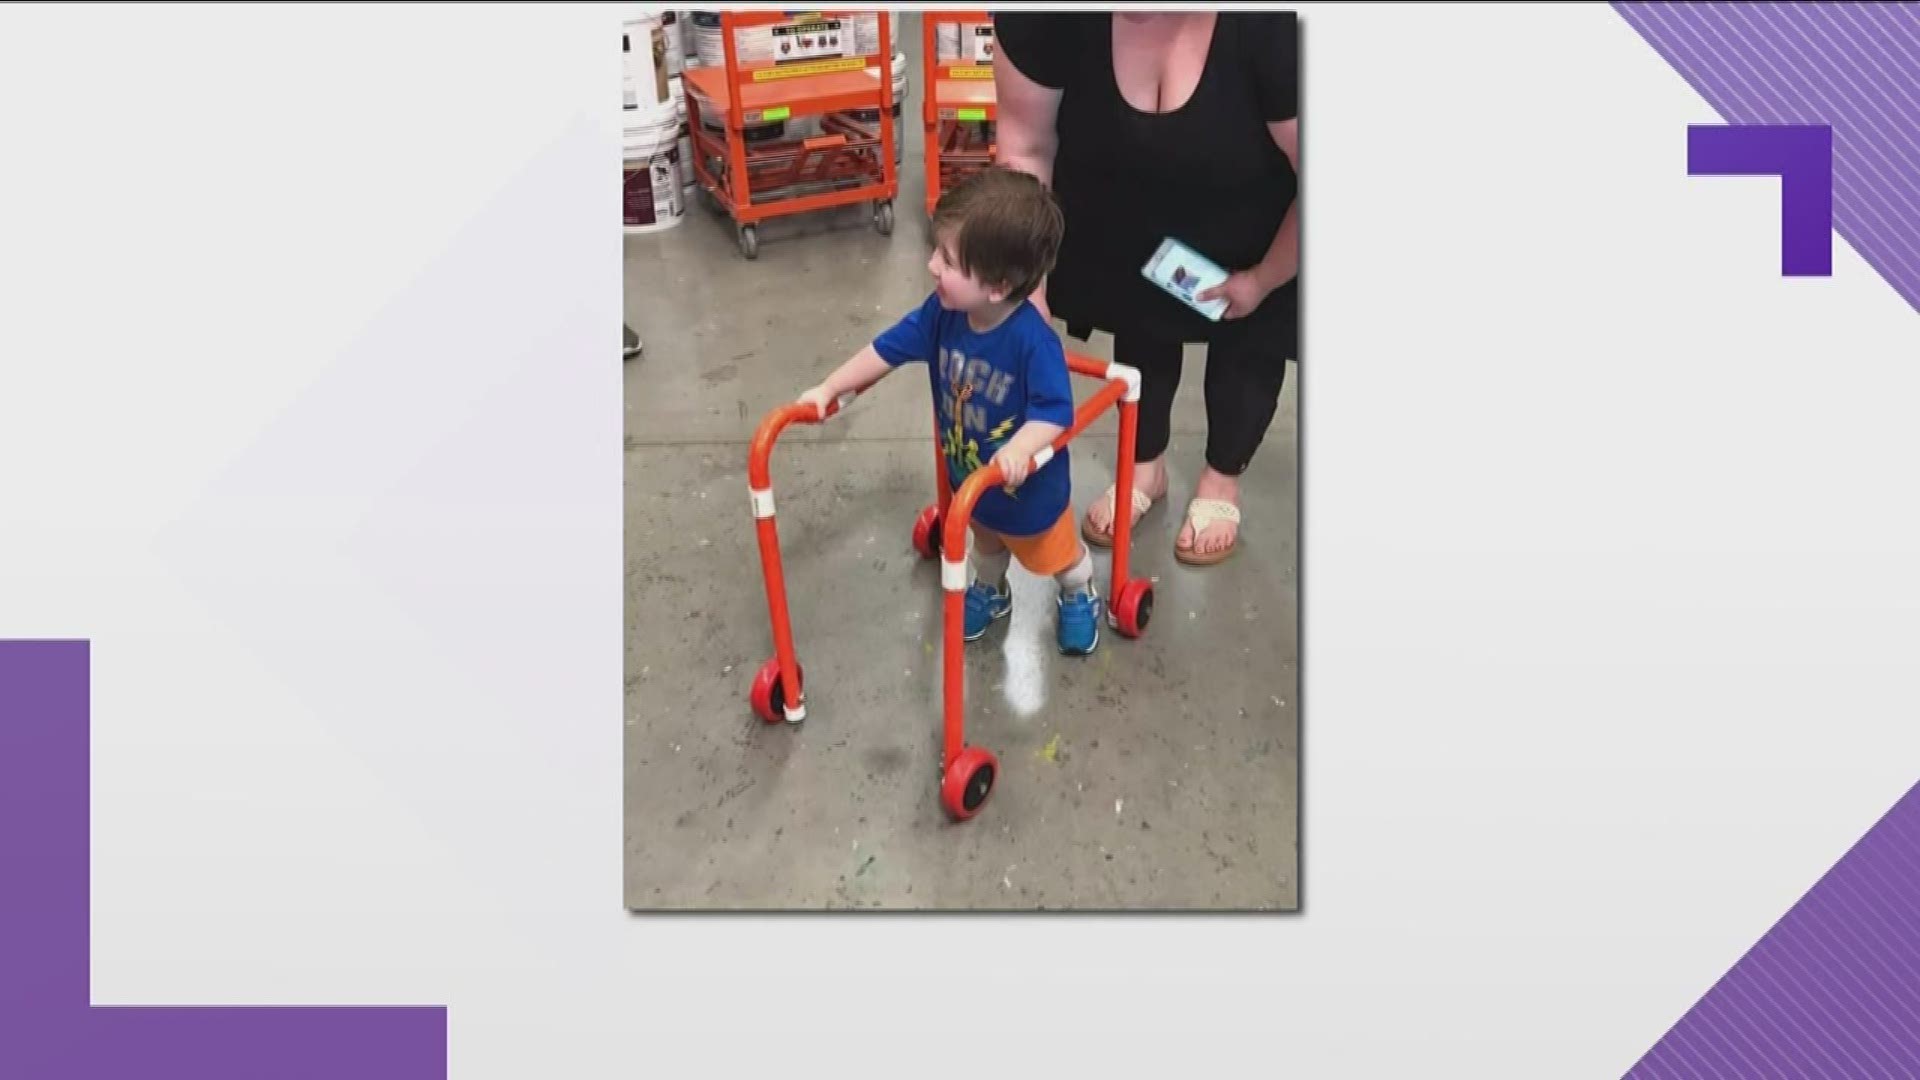 Logan's parents were concerned their insurance wouldn't pay for the walker that he needed.